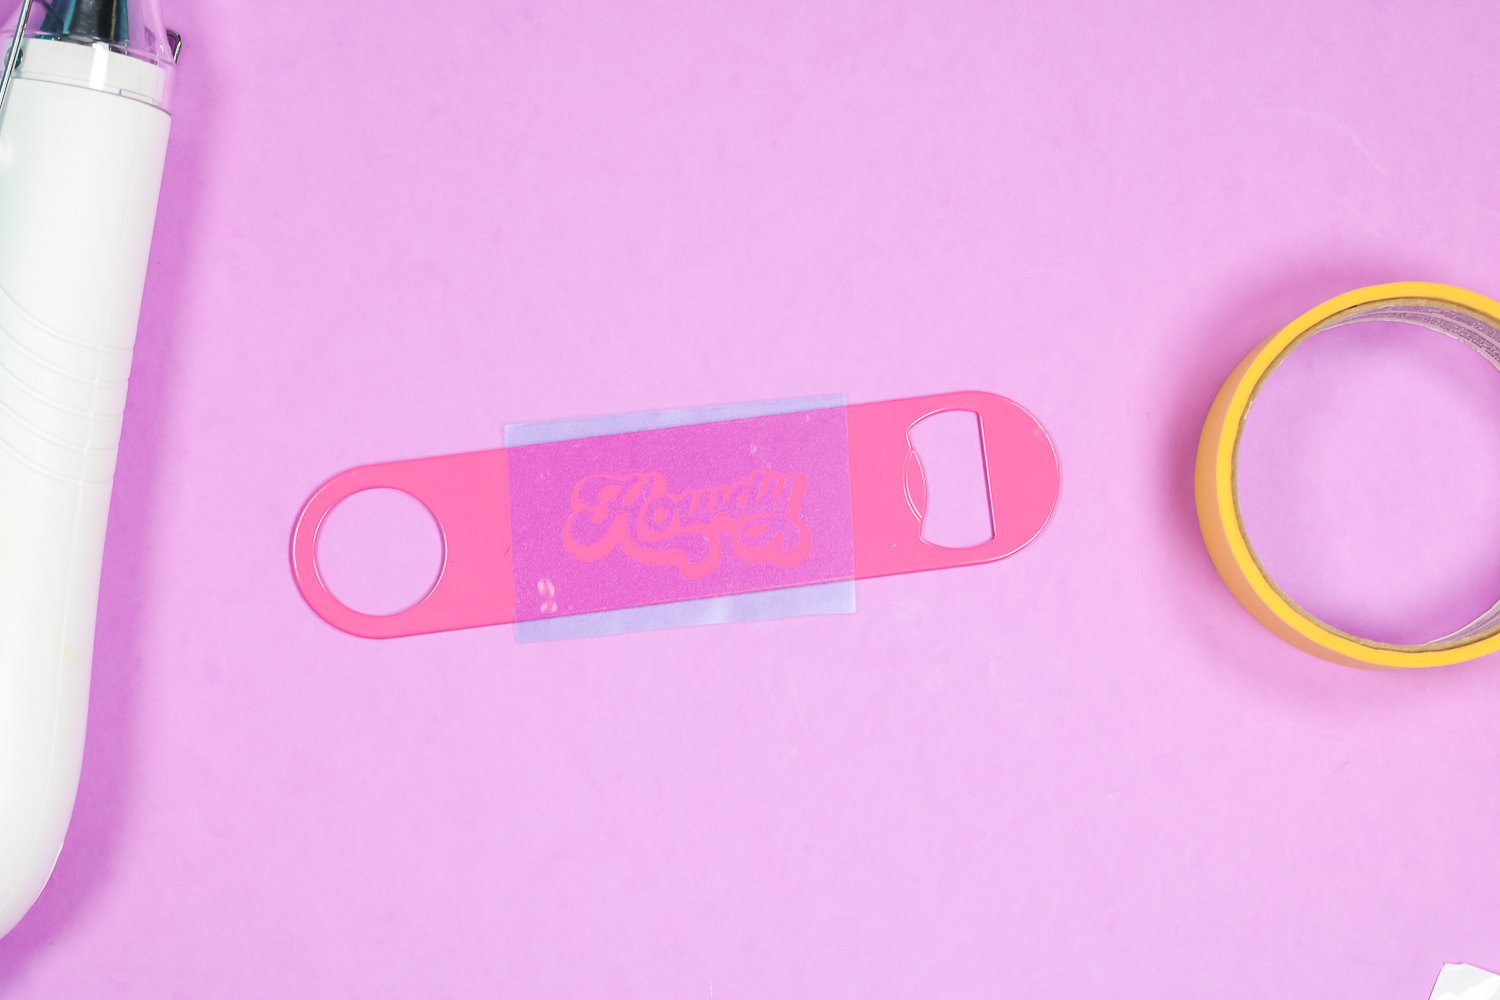 Apply stencil to pink bottle opener.